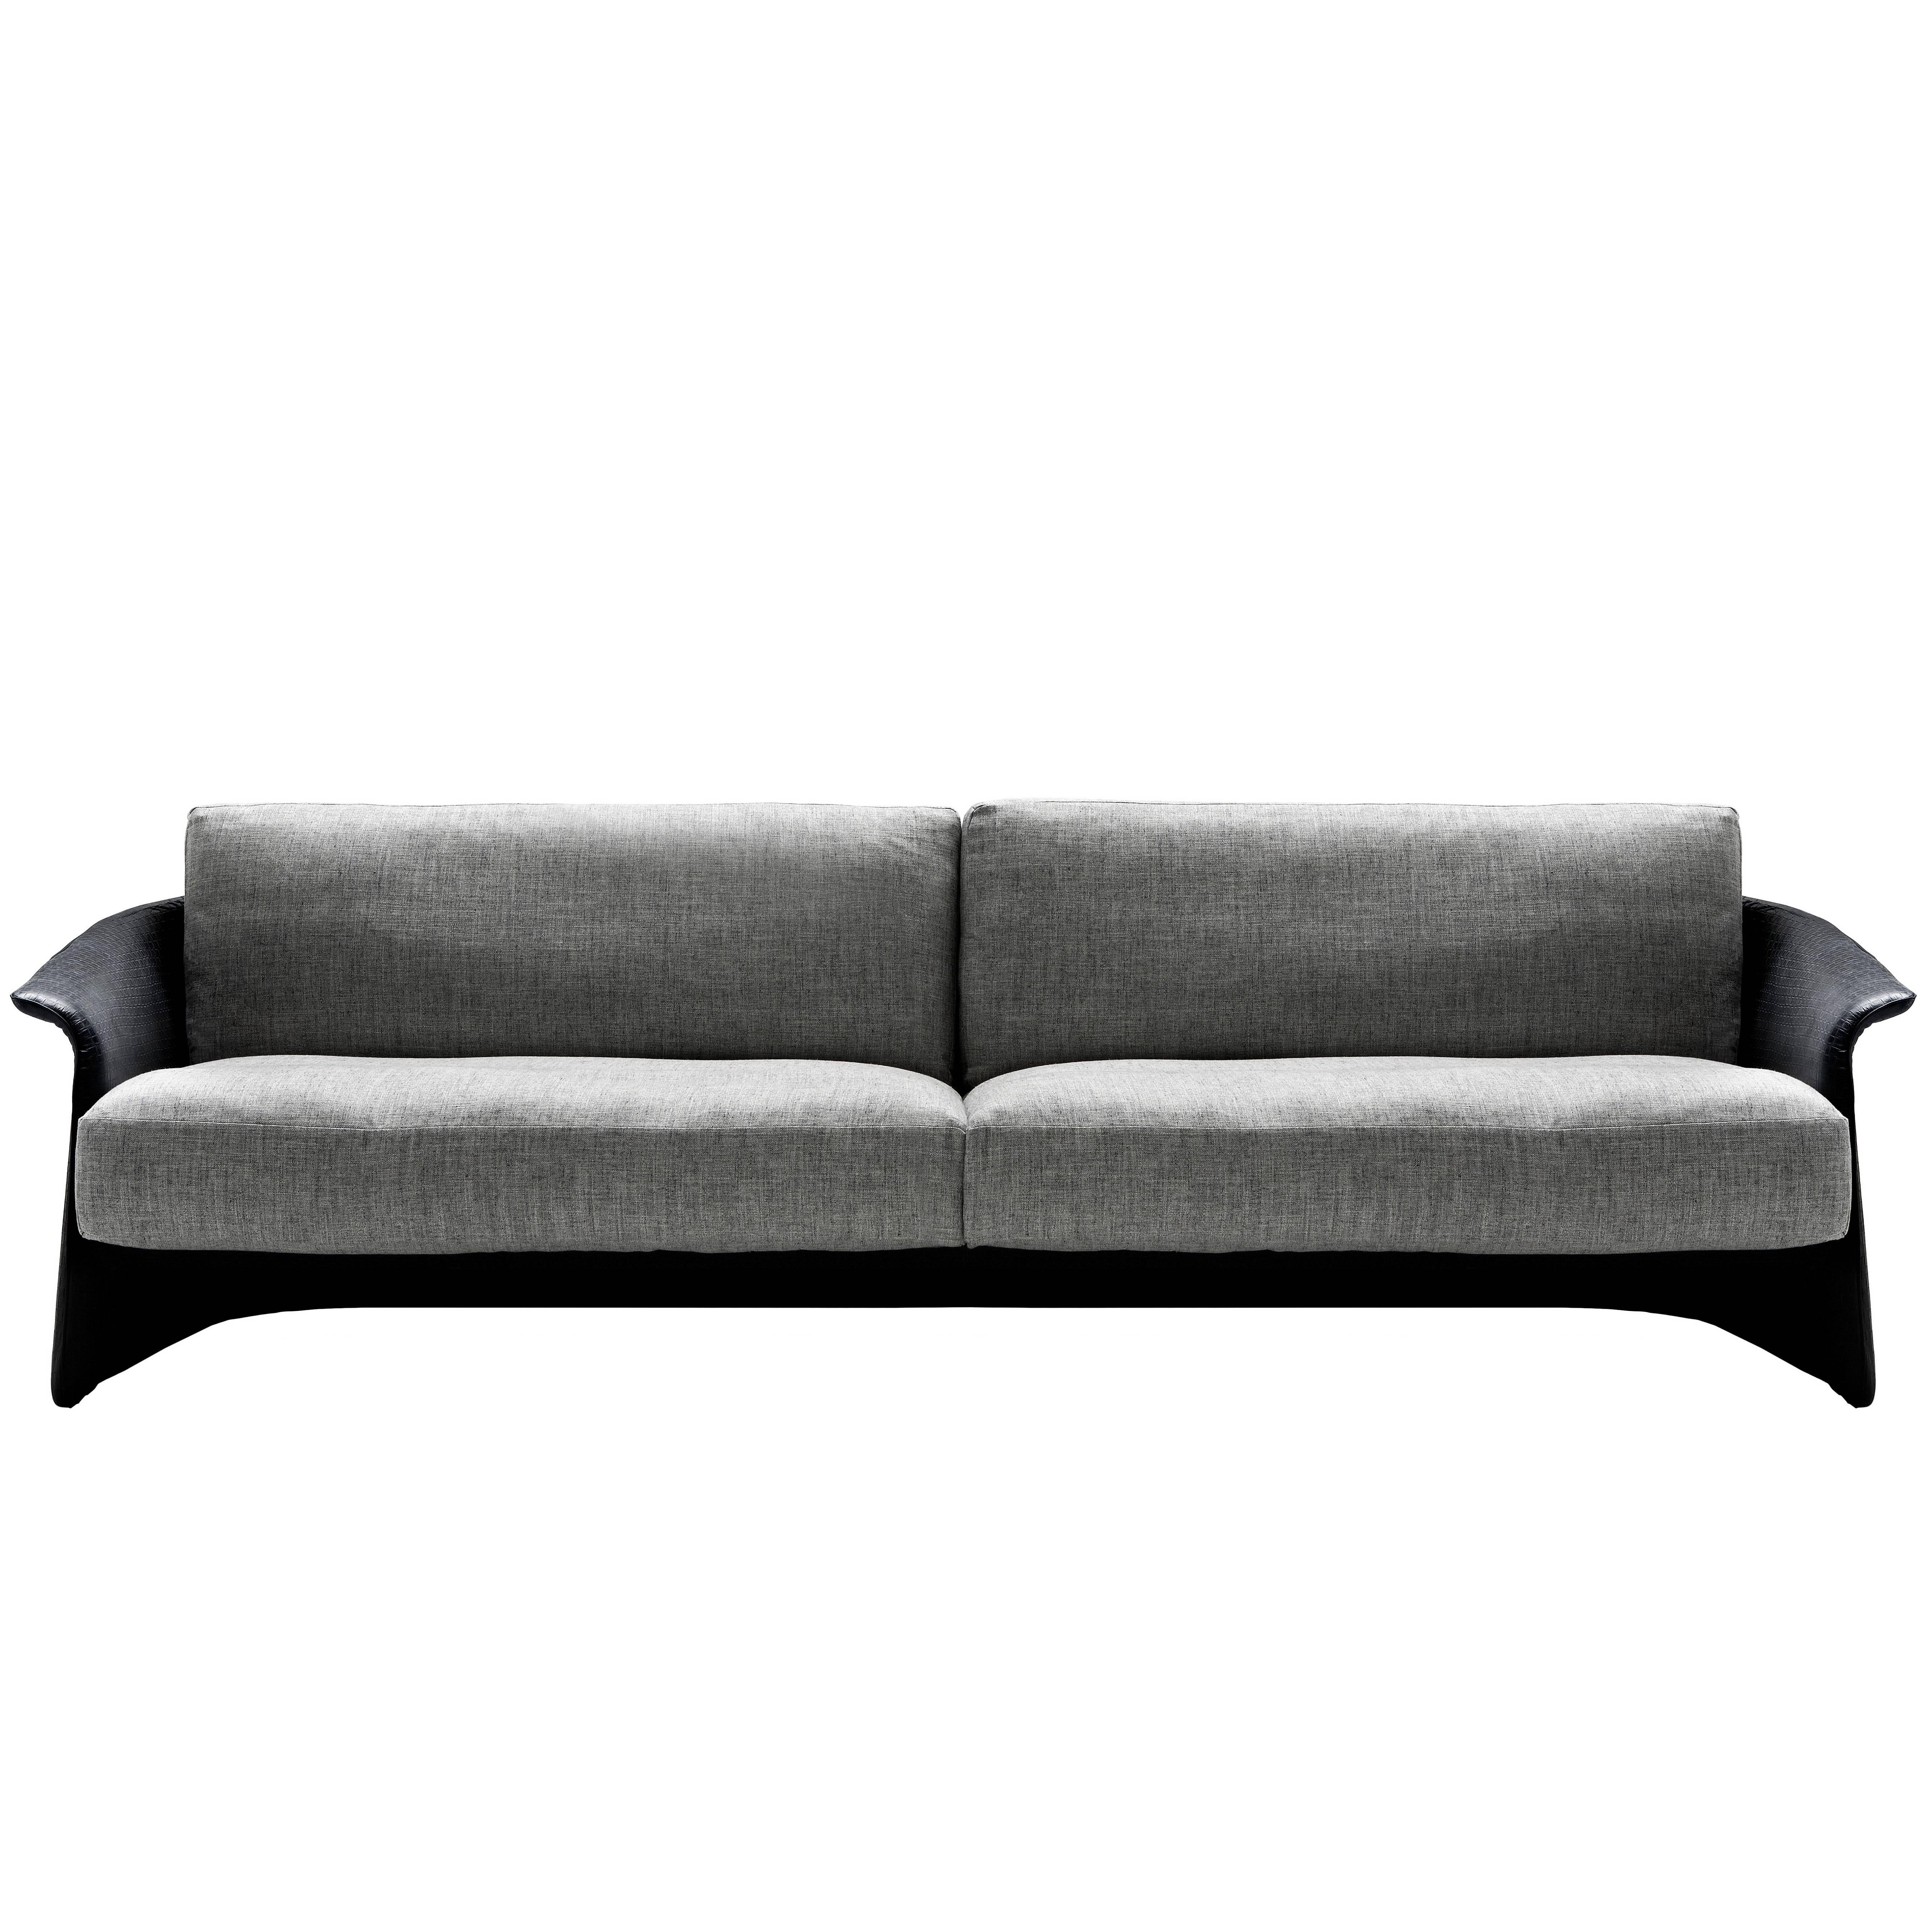 "Garçonne" Leather or Fabric and Goose Feather Sofa by Carlo Colombo for Driade For Sale